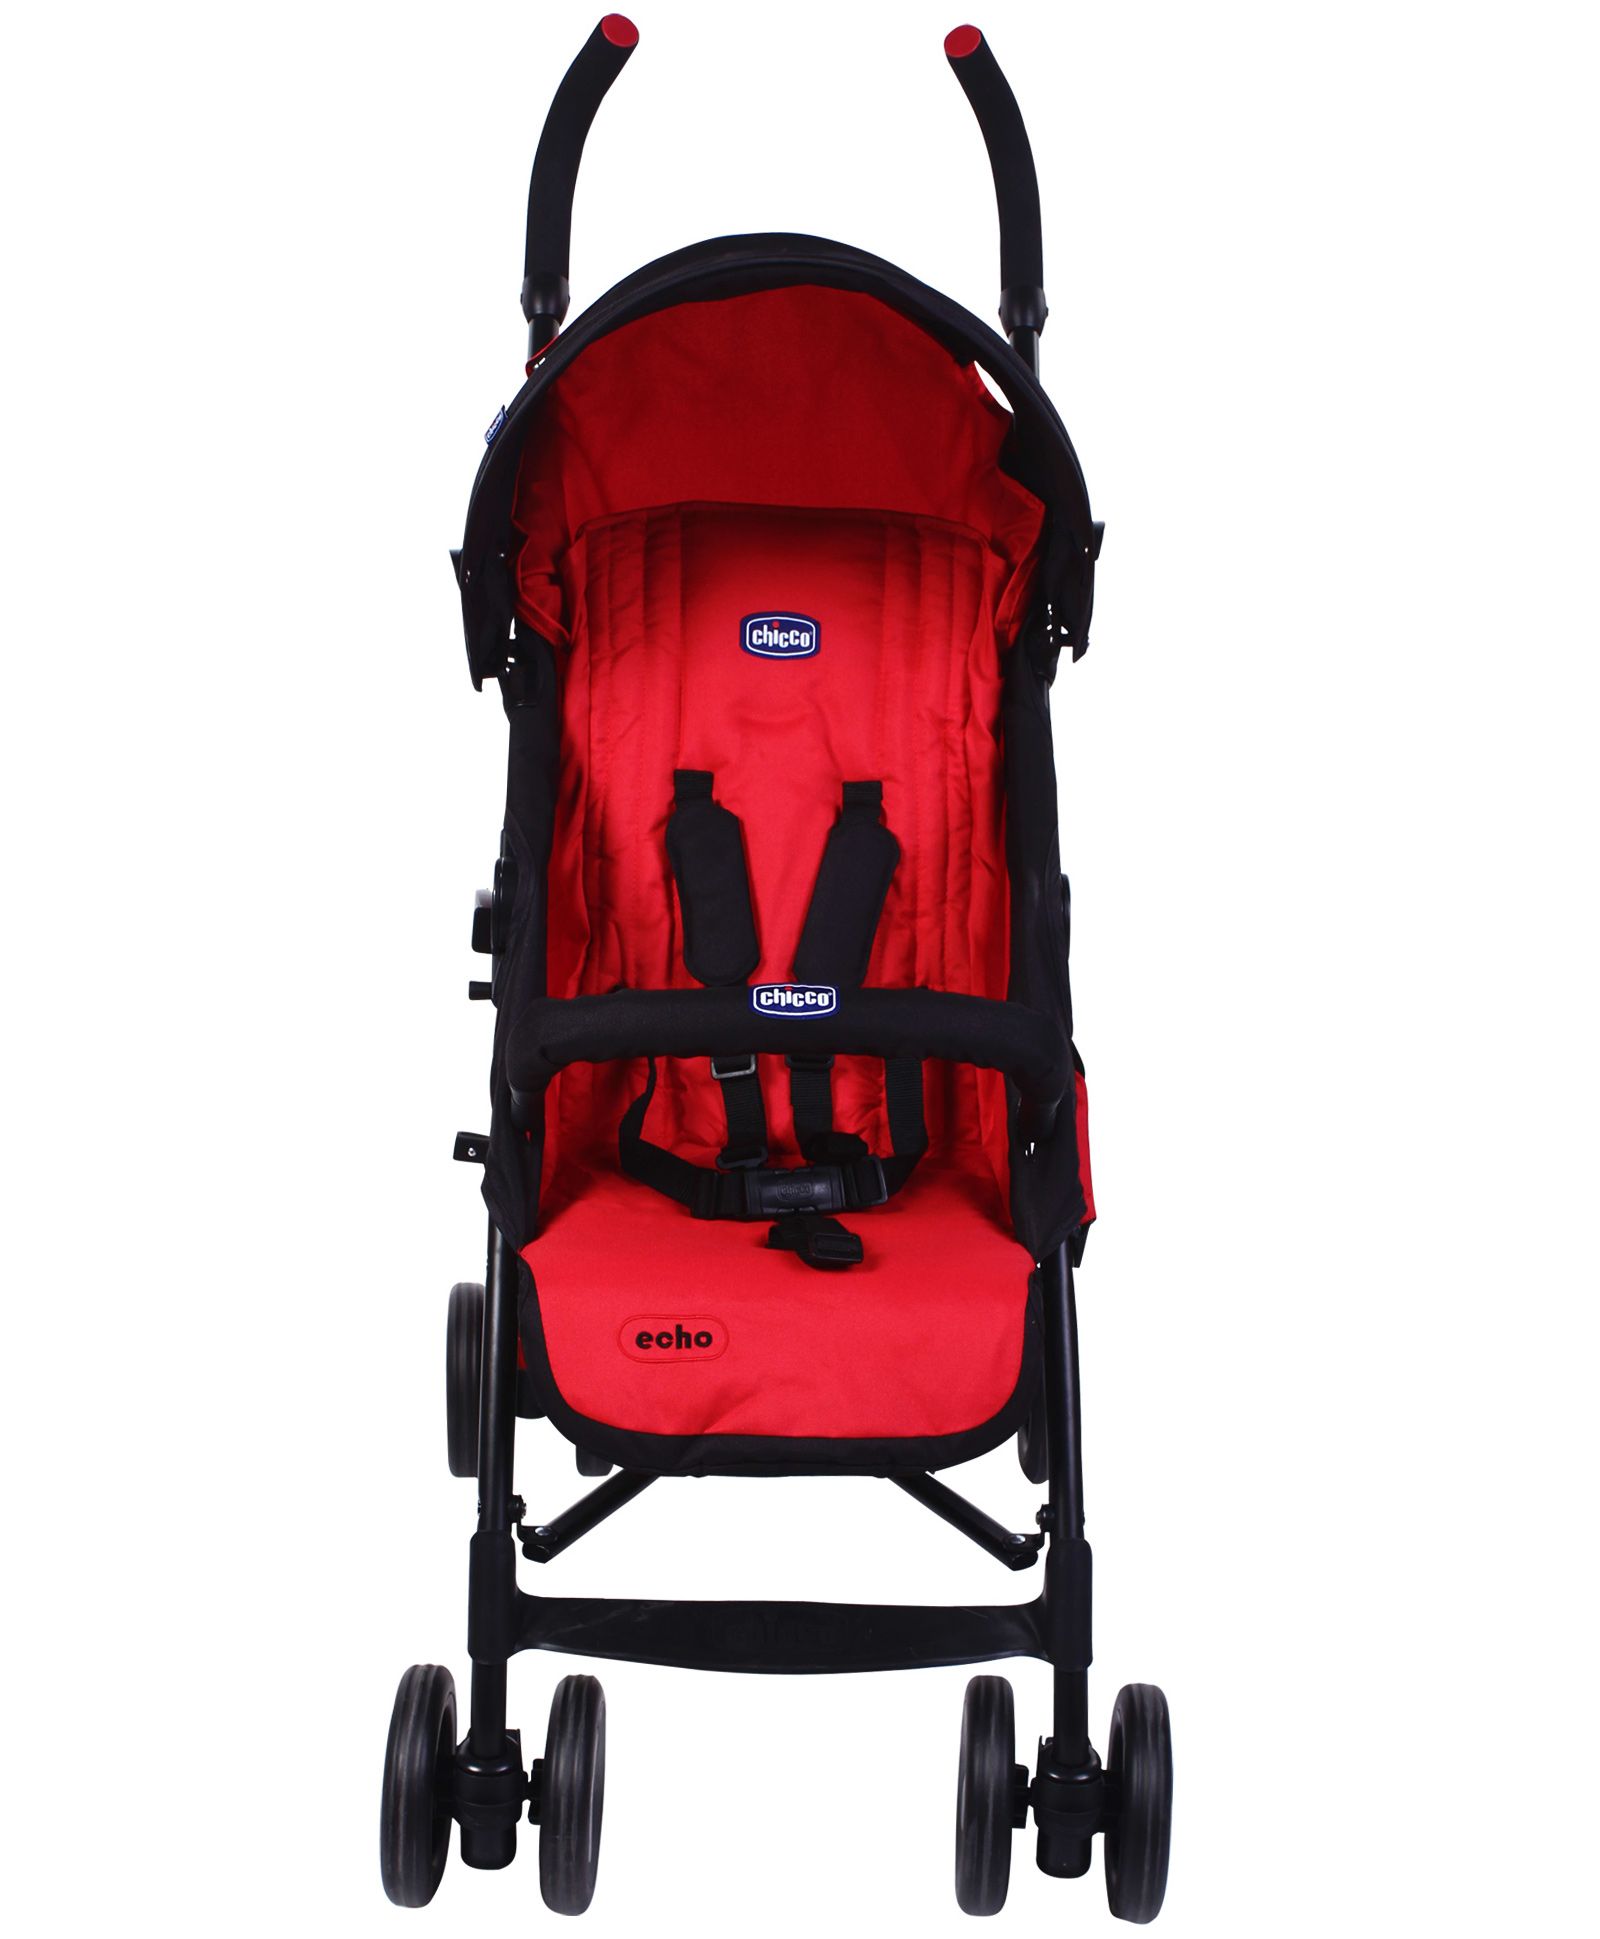 chicco echo stroller weight